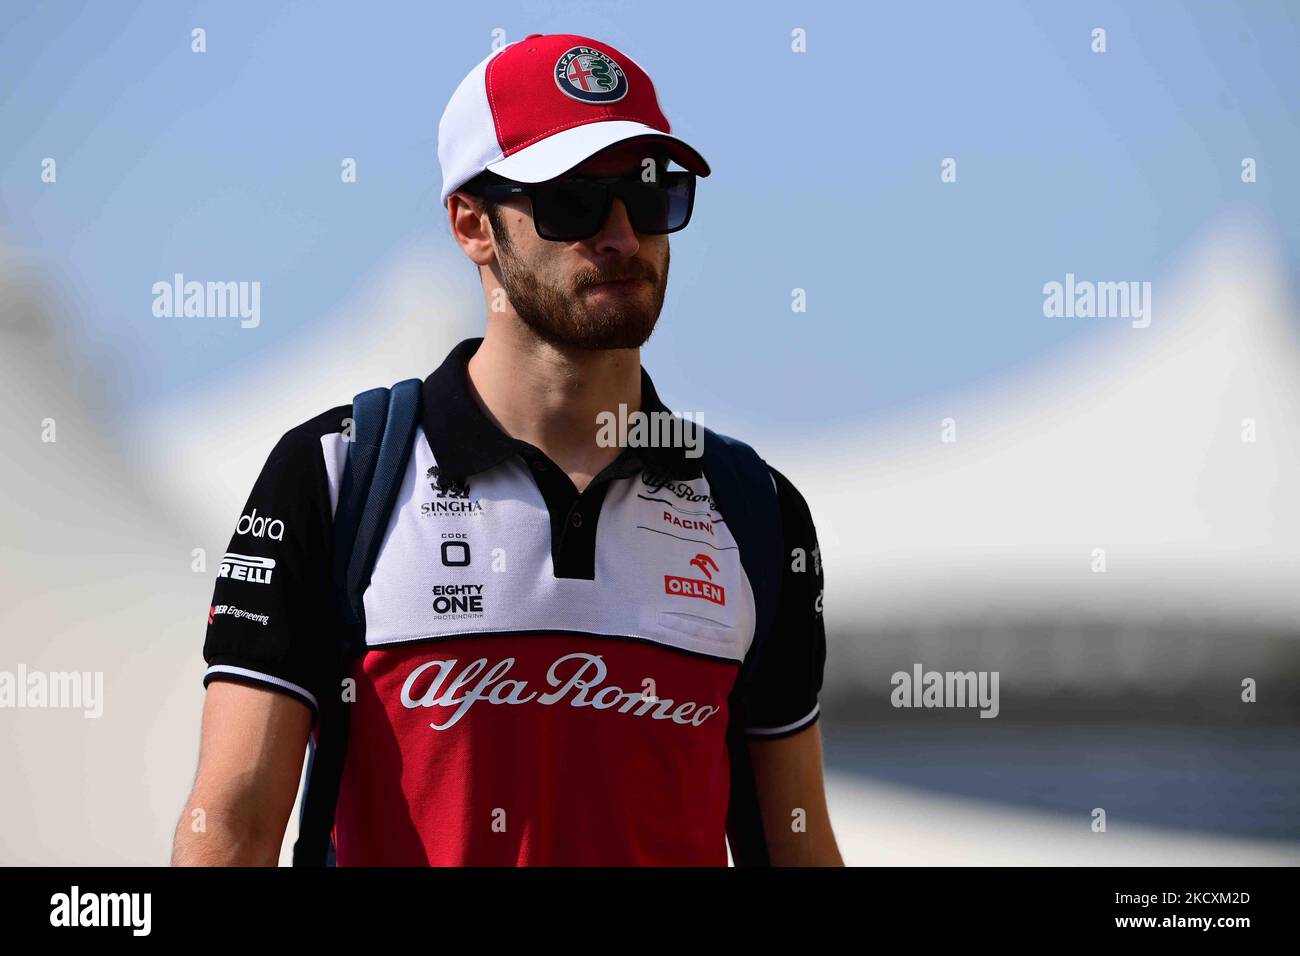 Antonio Giovinazzi of Alfa Romeo Racing ORLEN arrived in to the paddock before qualifying session of last race of the year in Yes Marina Circuit, Yes Island, Abu Dhabi, Uniter Arab Emirates, 11 December 2021 (Photo by Andrea Diodato/NurPhoto) Stock Photo